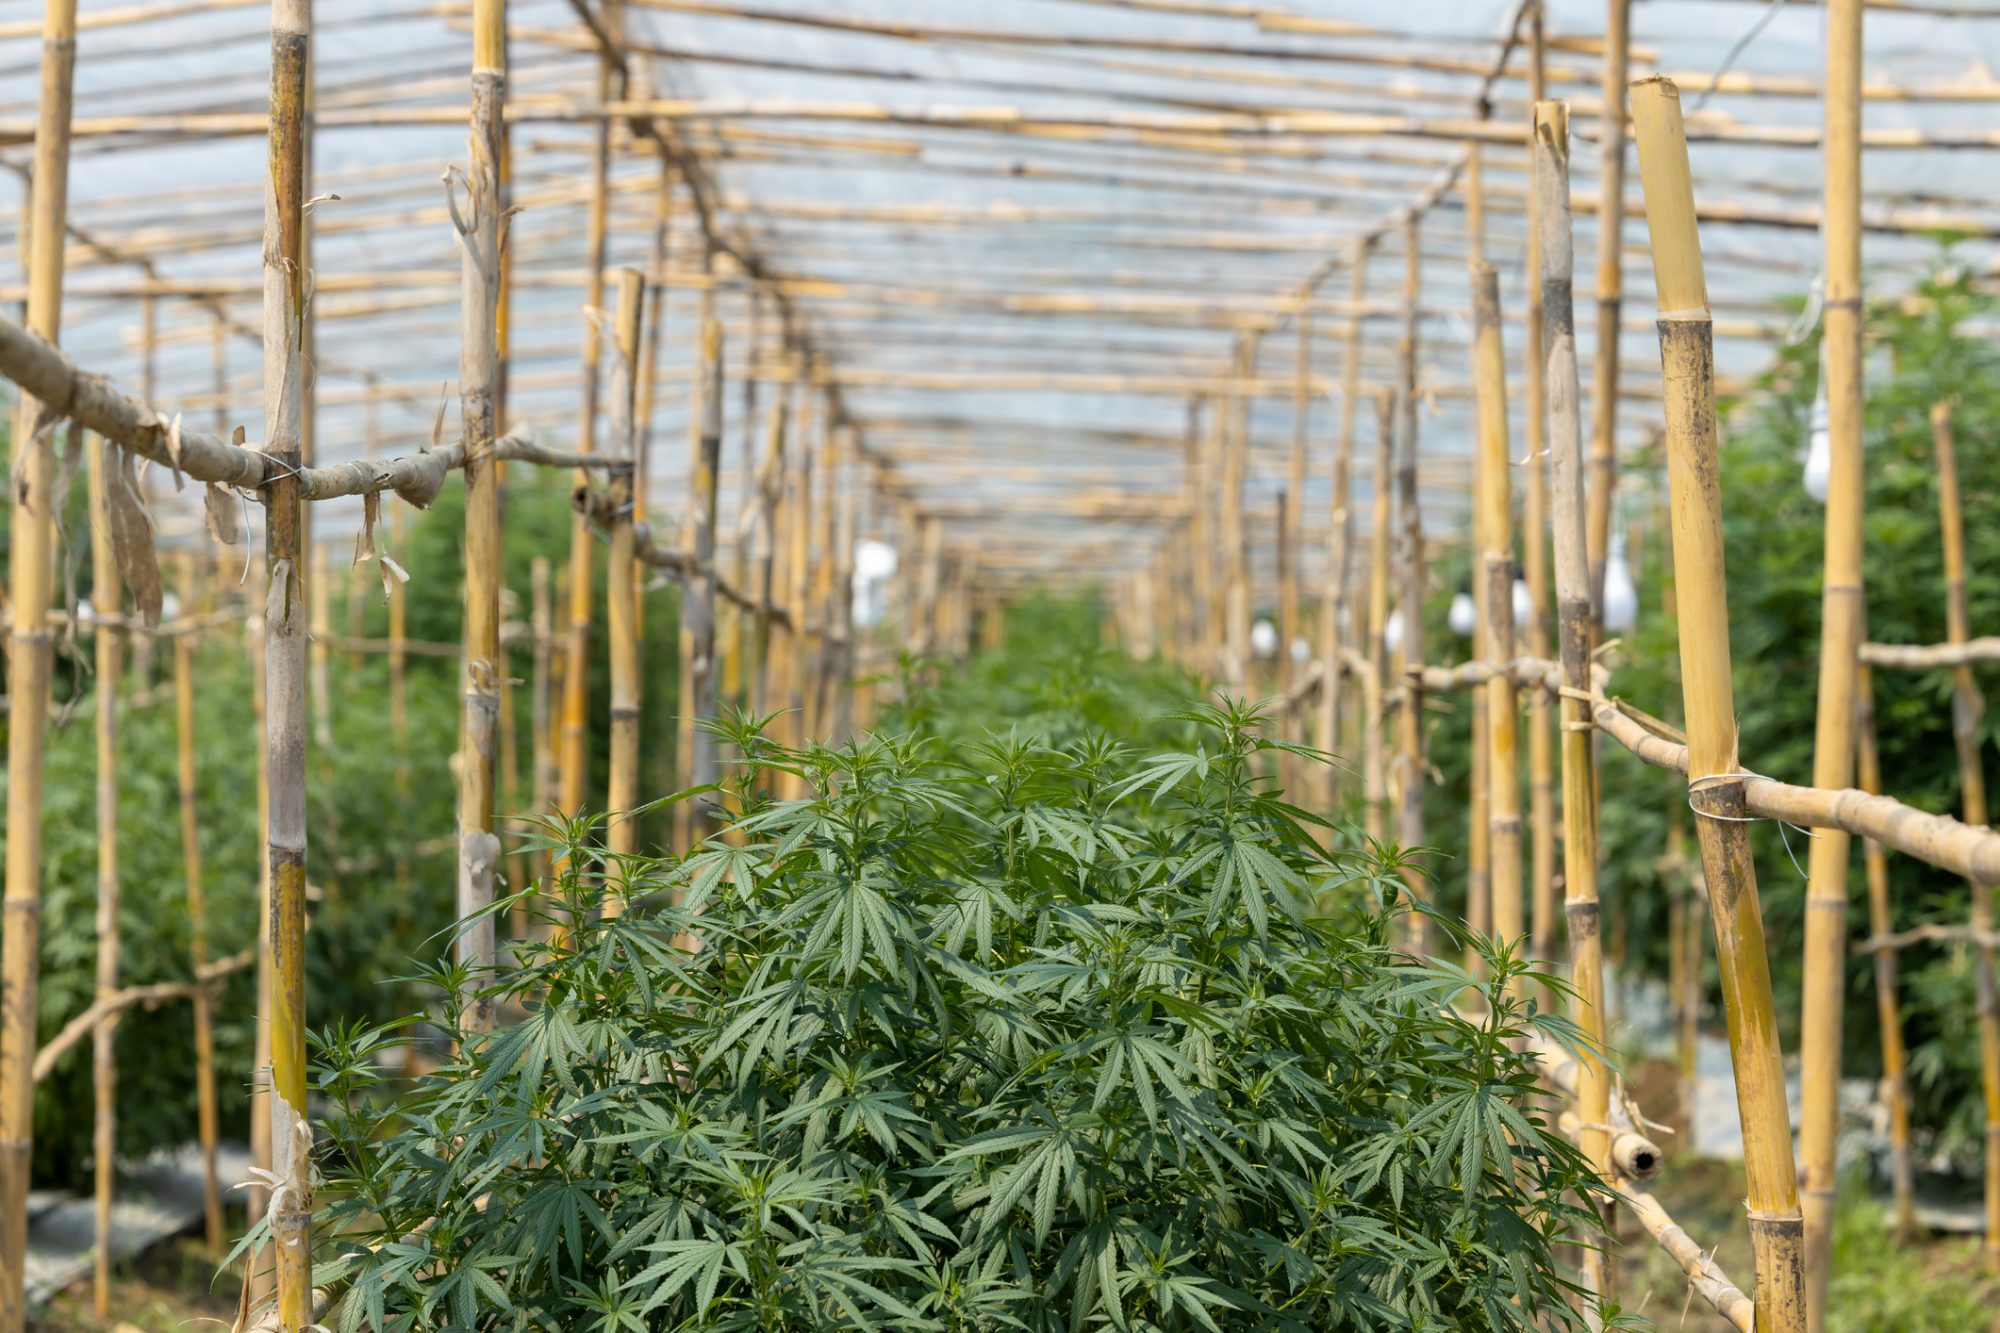 Thailand gives out one million free cannabis plants to promote legalisation